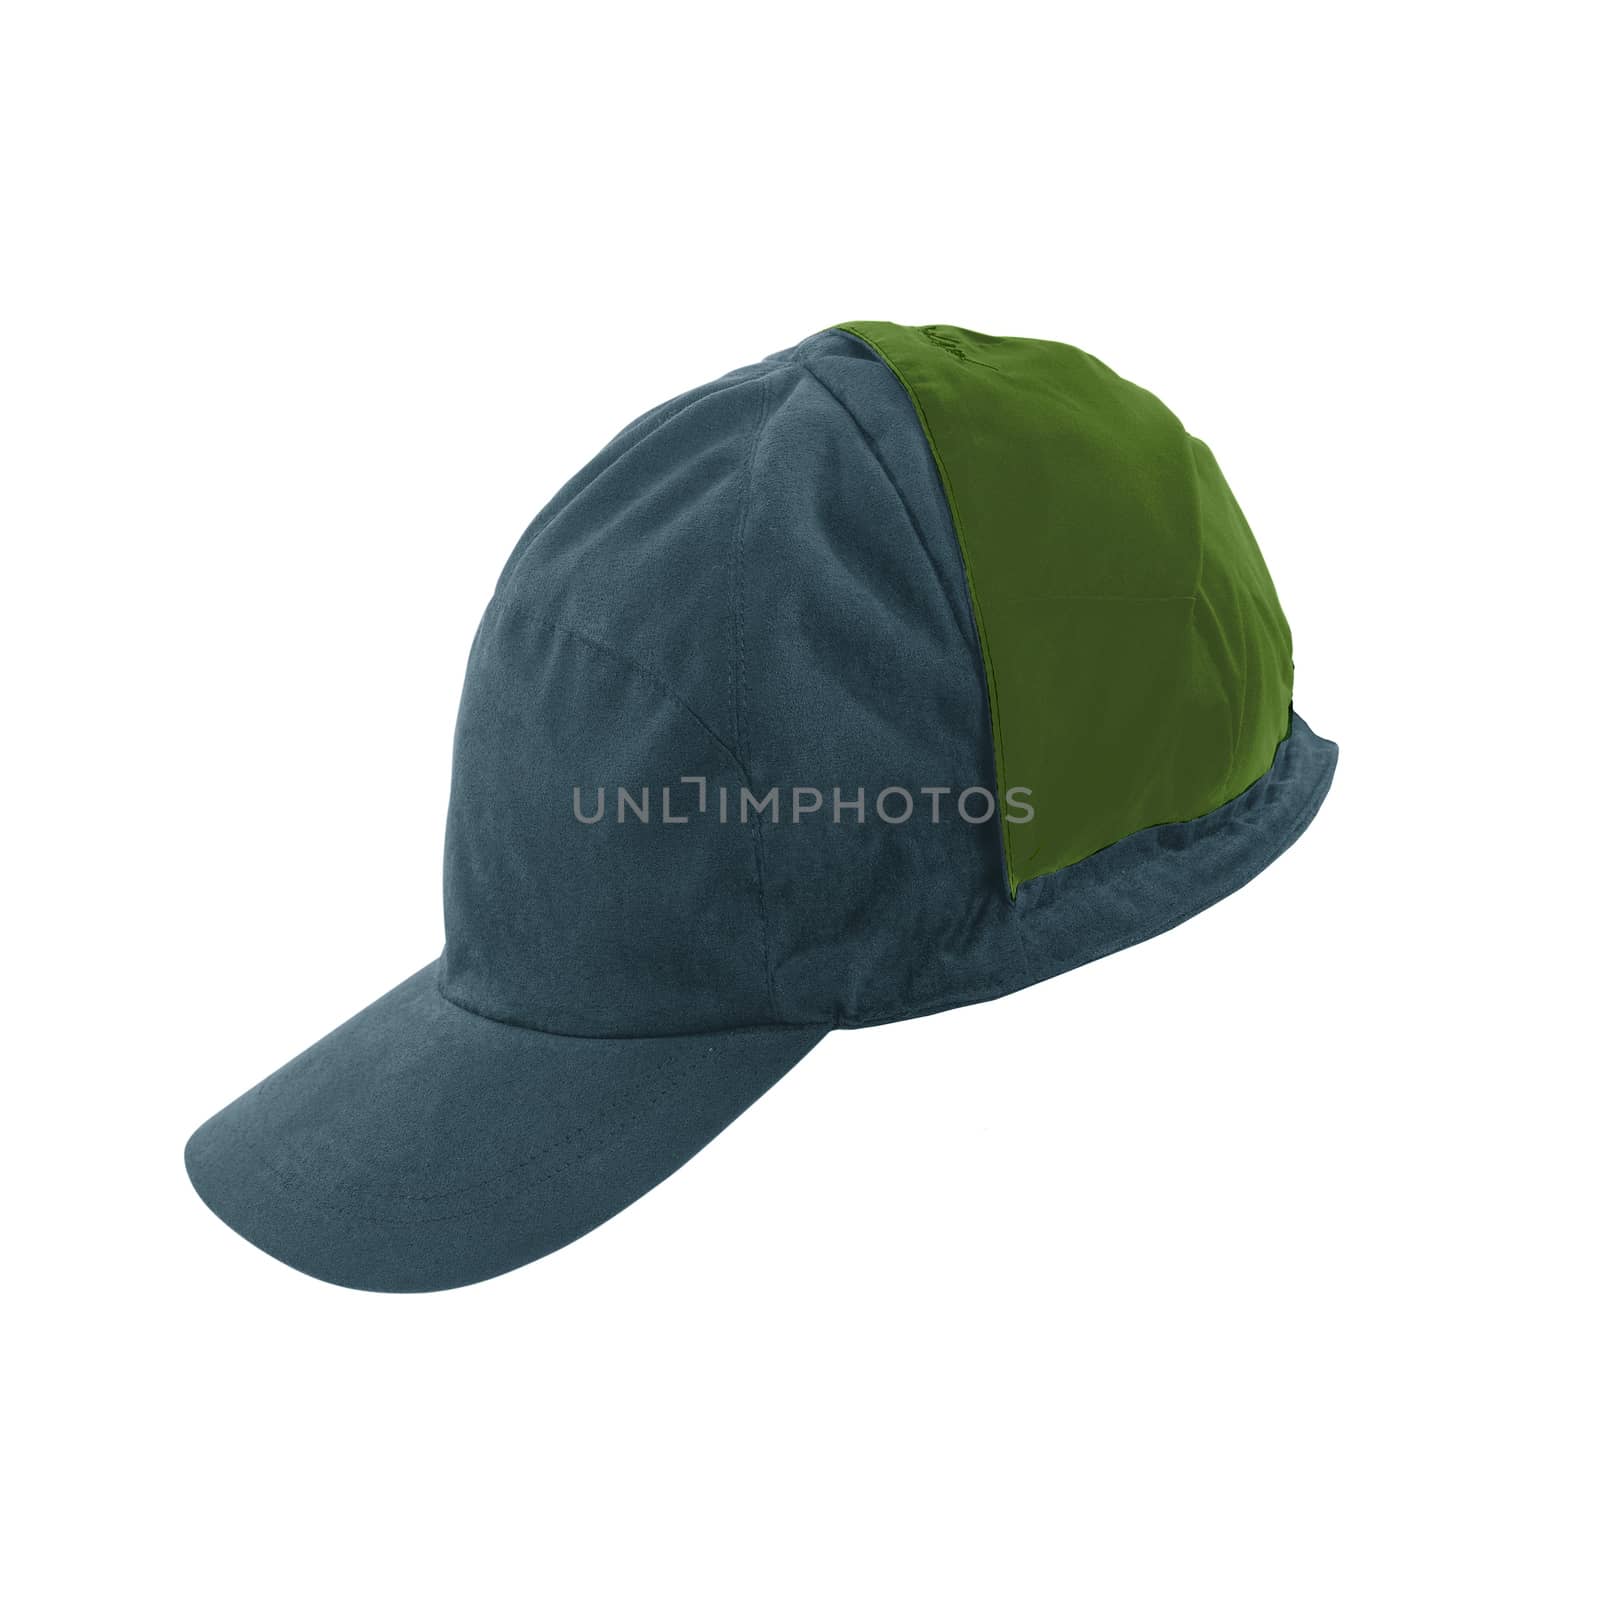 Cap on white background by shutswis